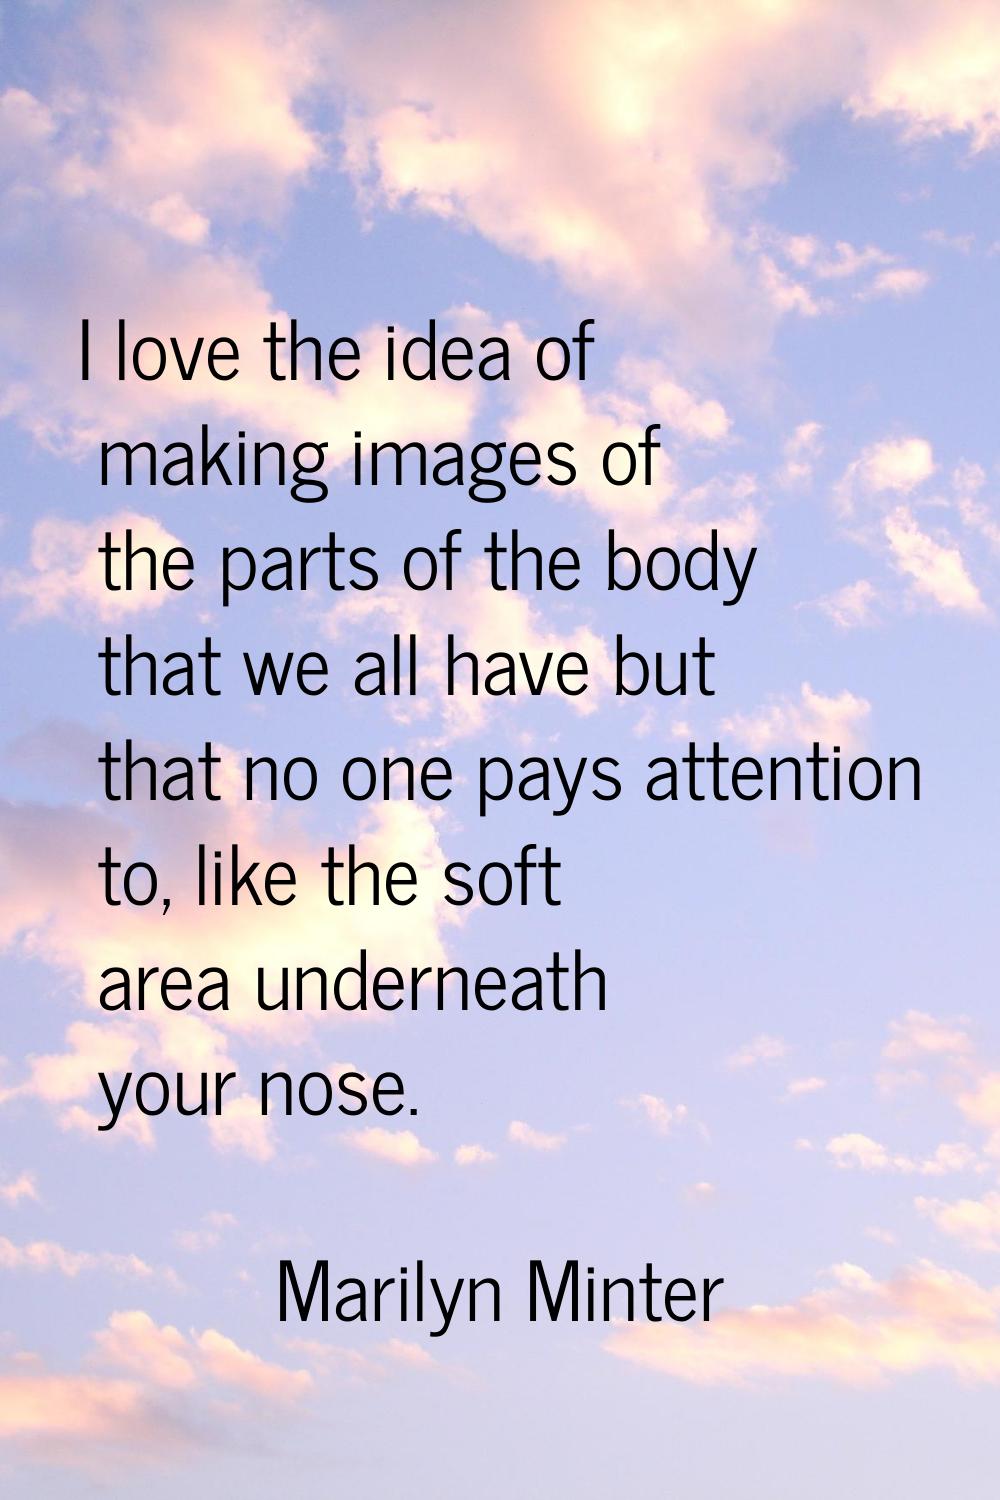 I love the idea of making images of the parts of the body that we all have but that no one pays att